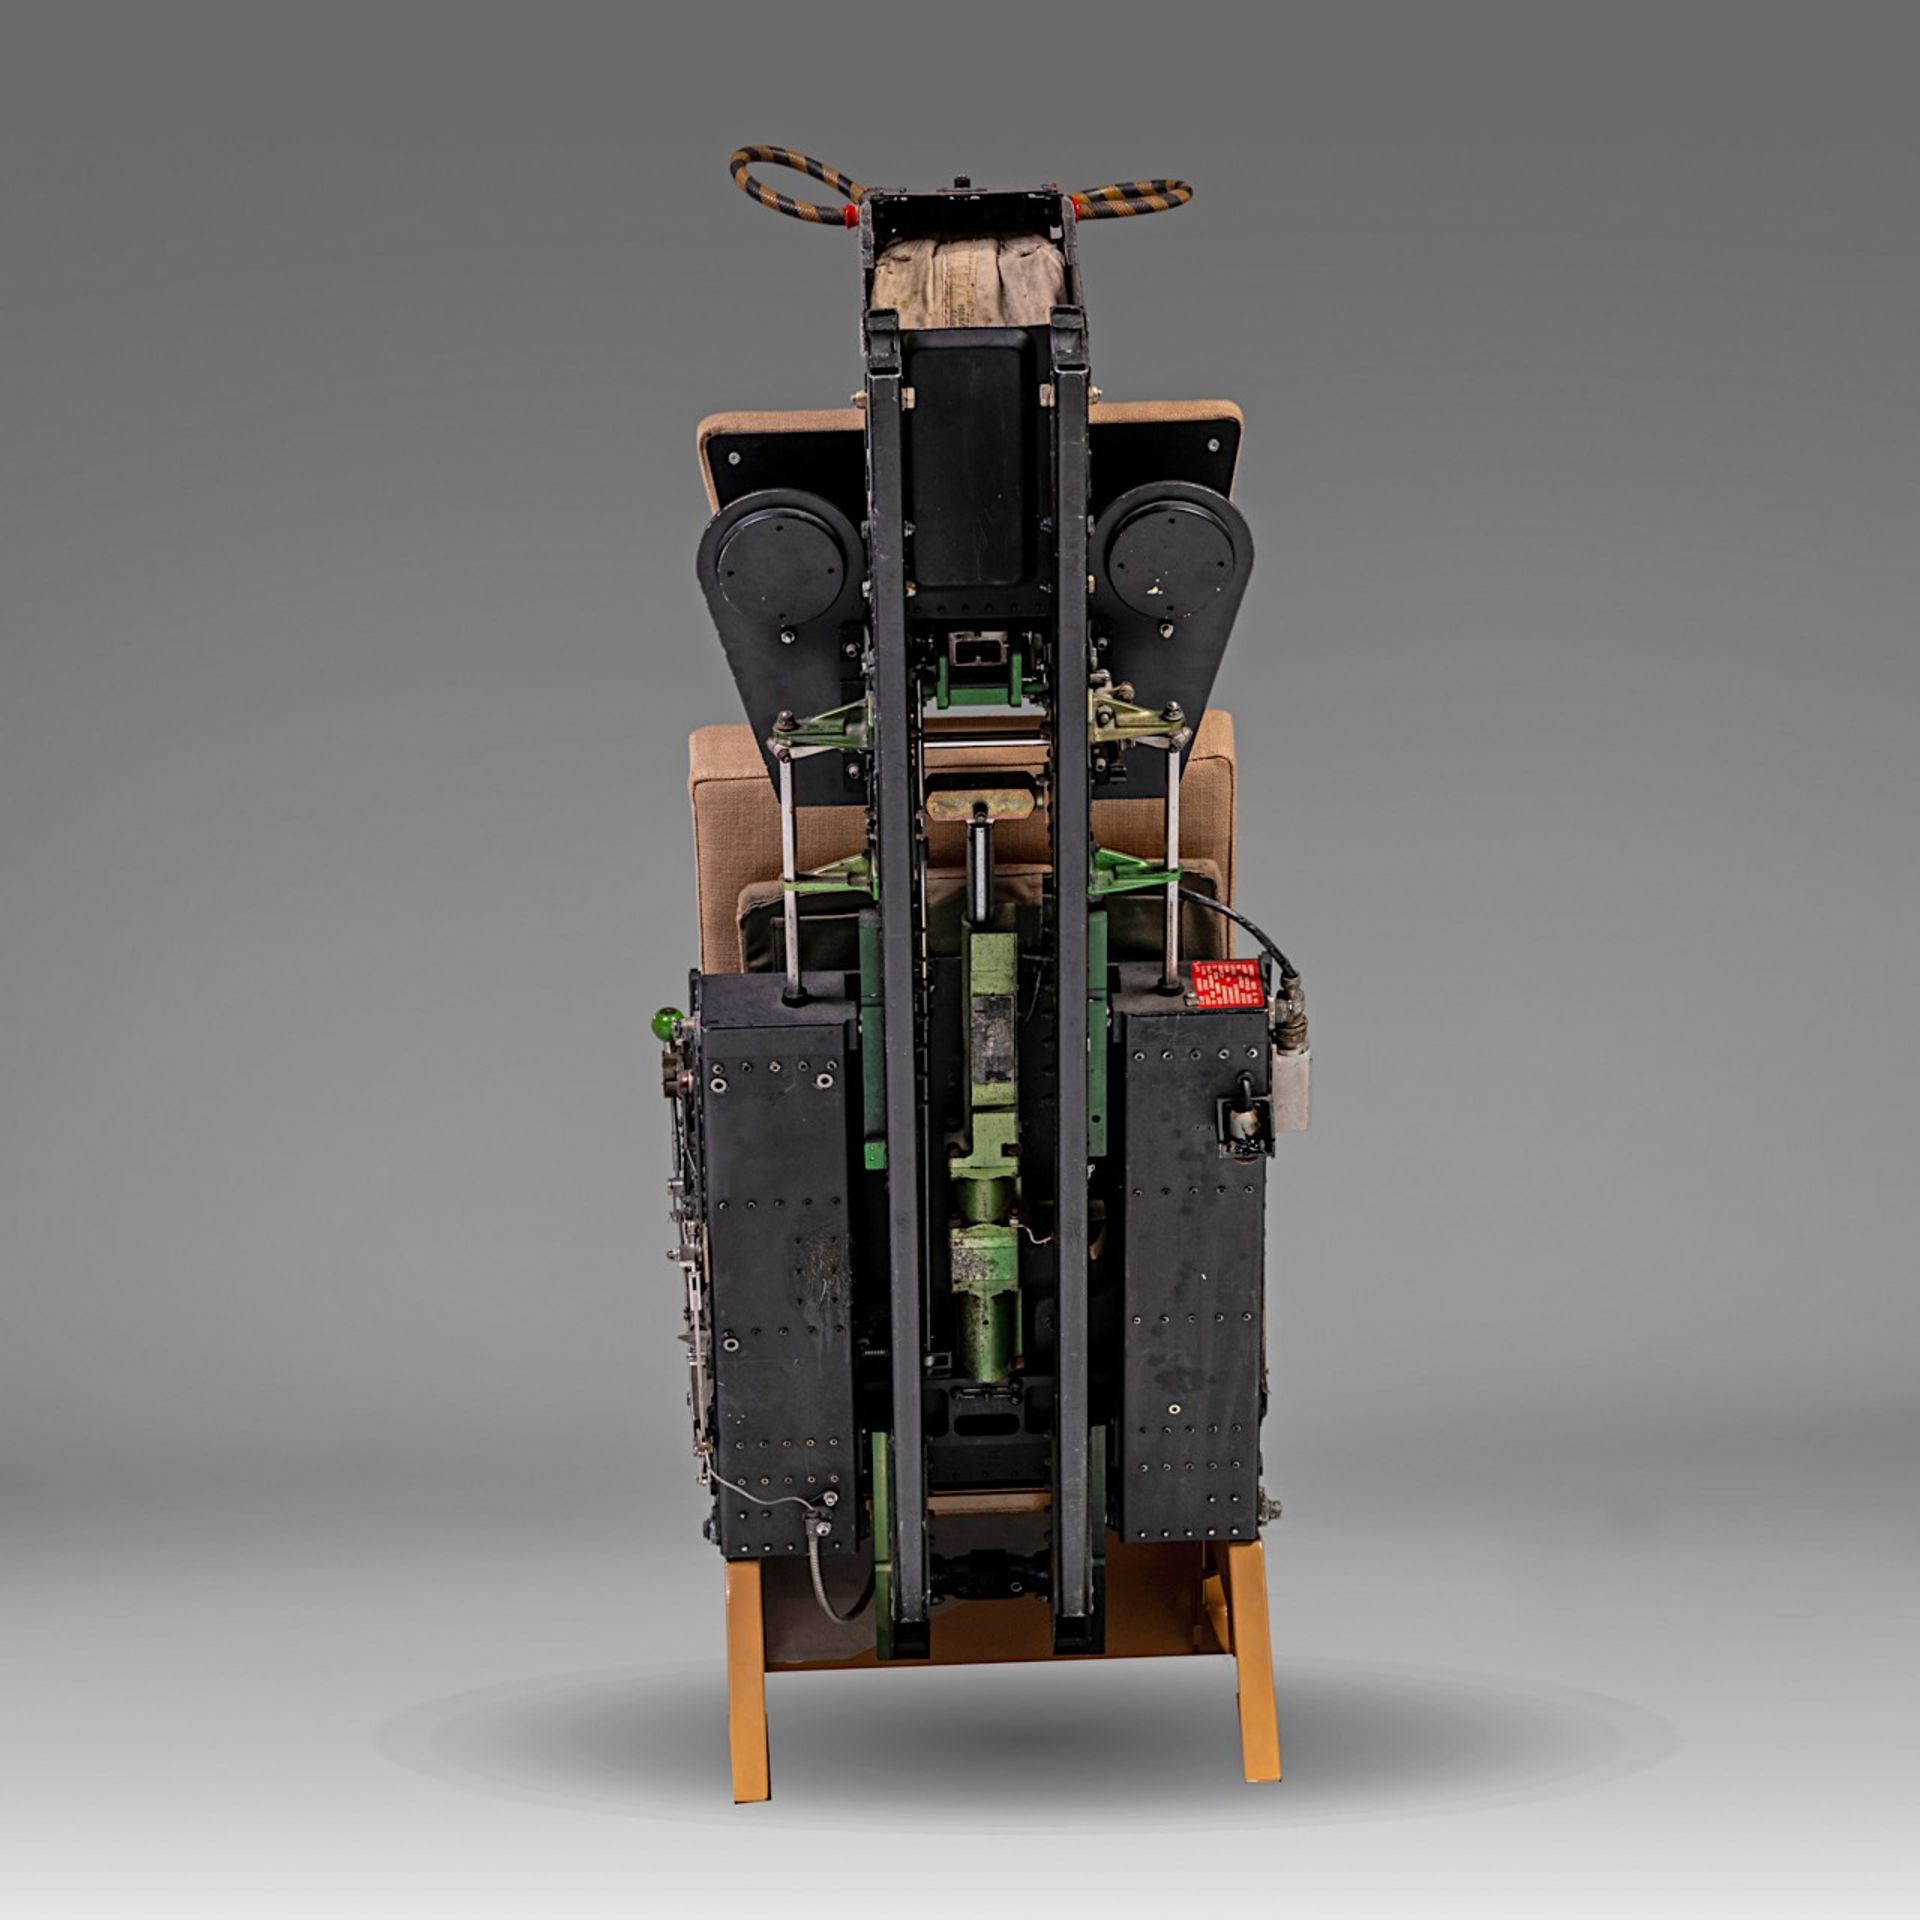 A Phantom II ejection seat with a top parachute section, H 129 - W 53 cm - Bild 5 aus 11